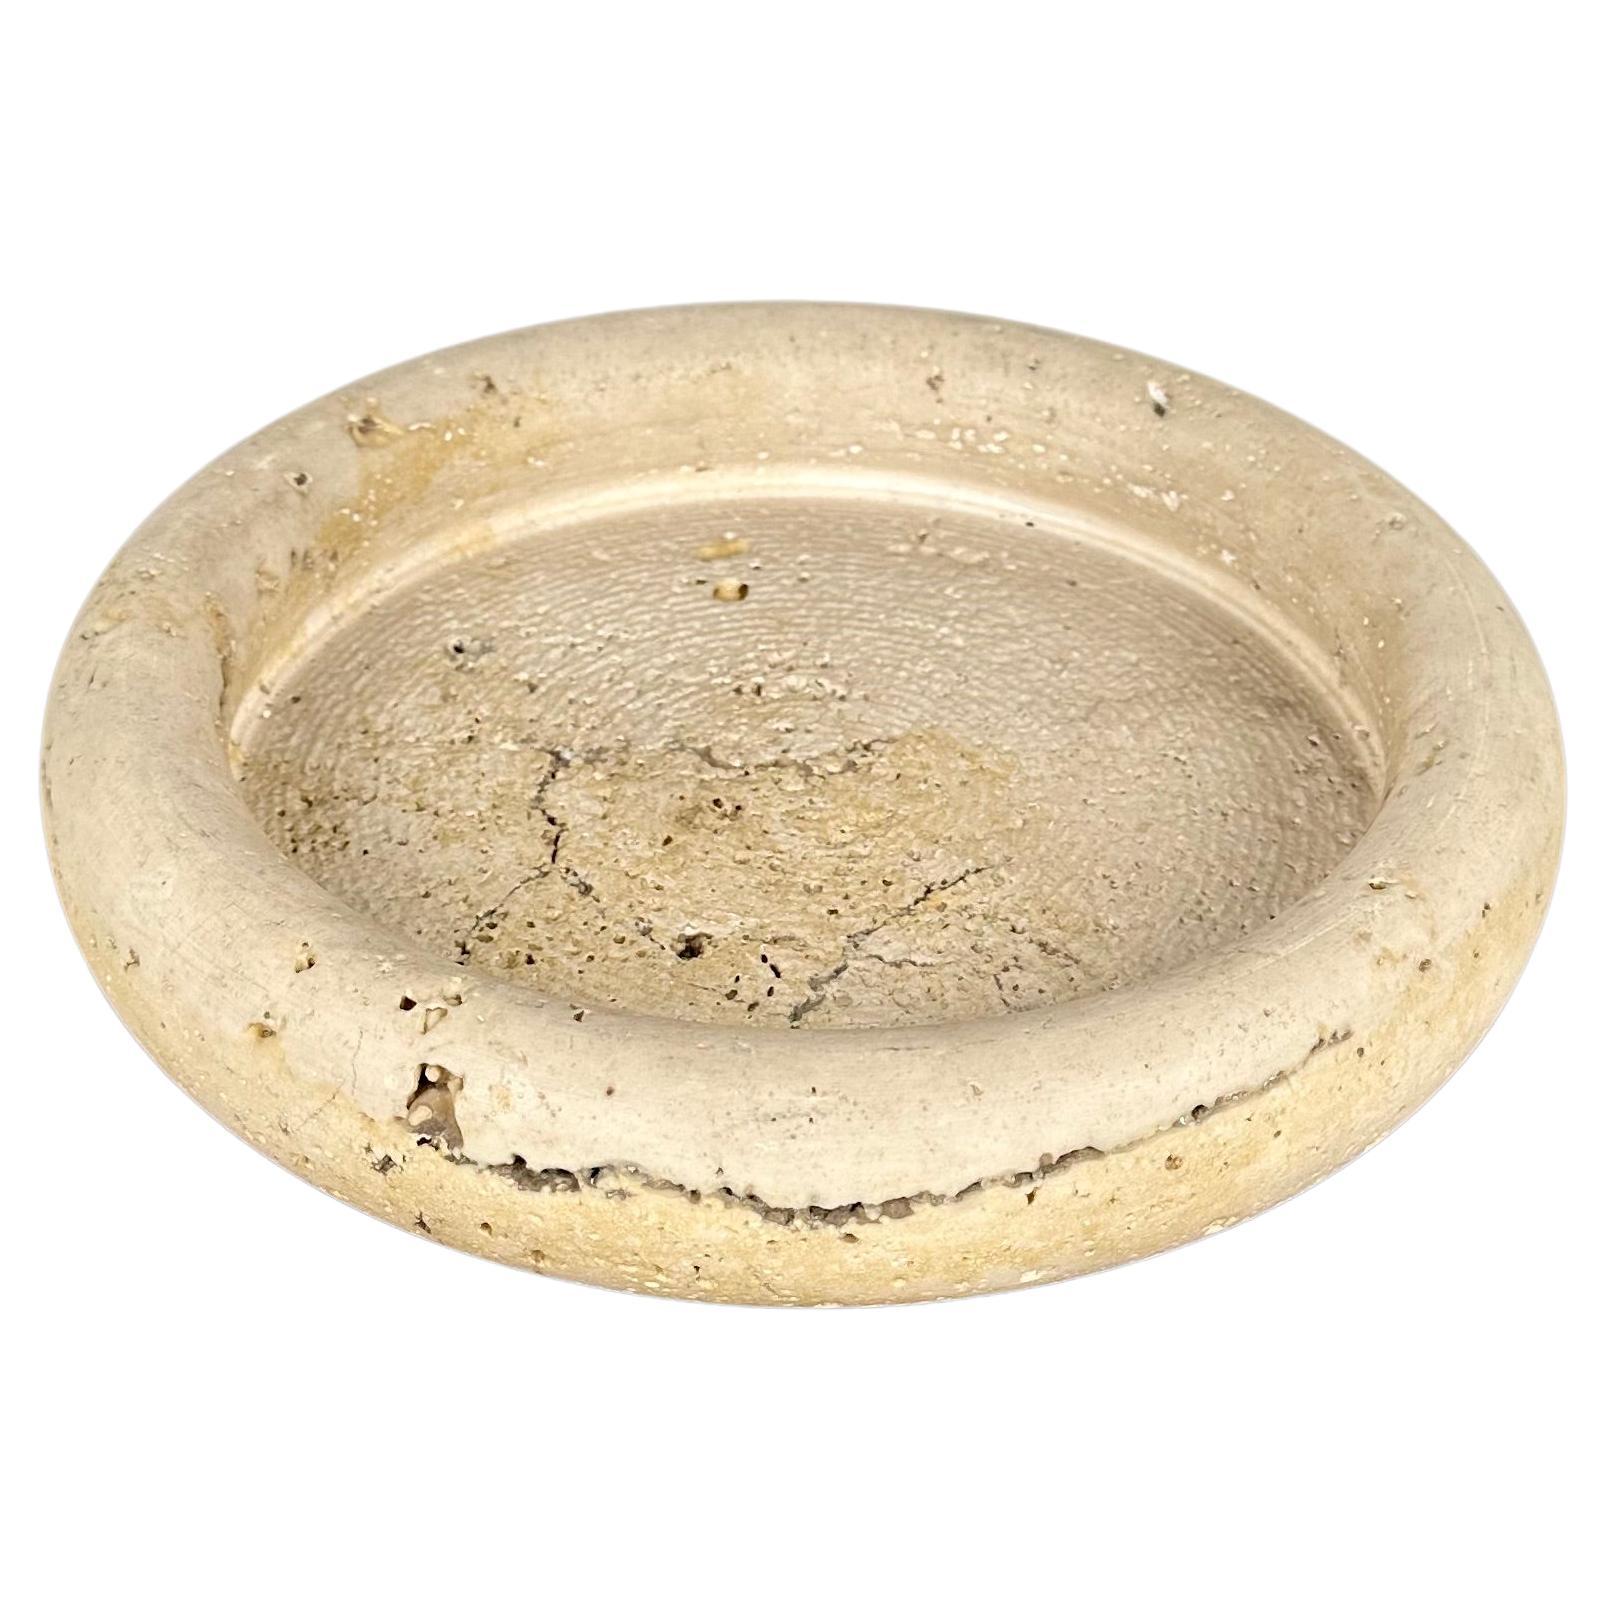 Midcentury round vide-poche dish in travertine by Fratelli Mannelli. 

Made in Italy in the 1970s. 

The original label is still attached on the back, as shown in the pictures.